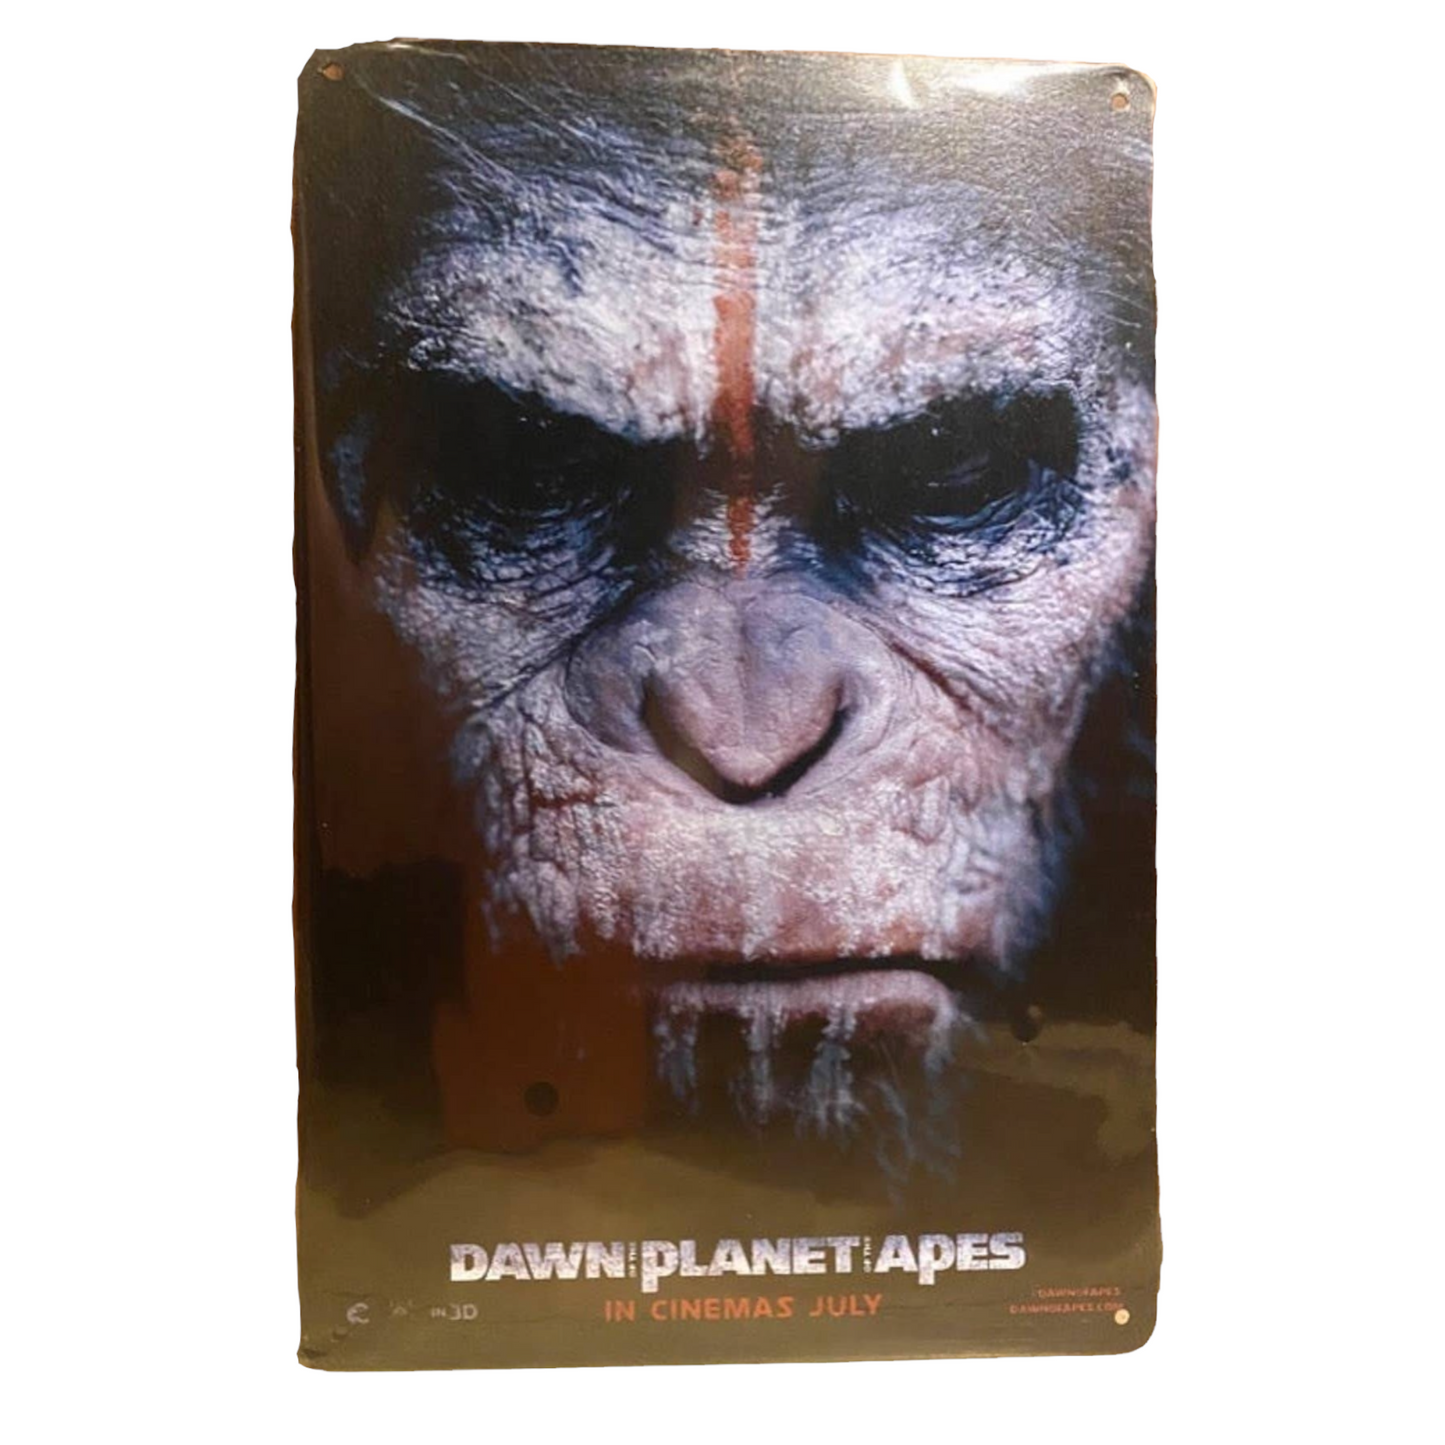 Dawn Of The Planet Of The Apes Movie Poster Metal Tin Sign 8"x12"